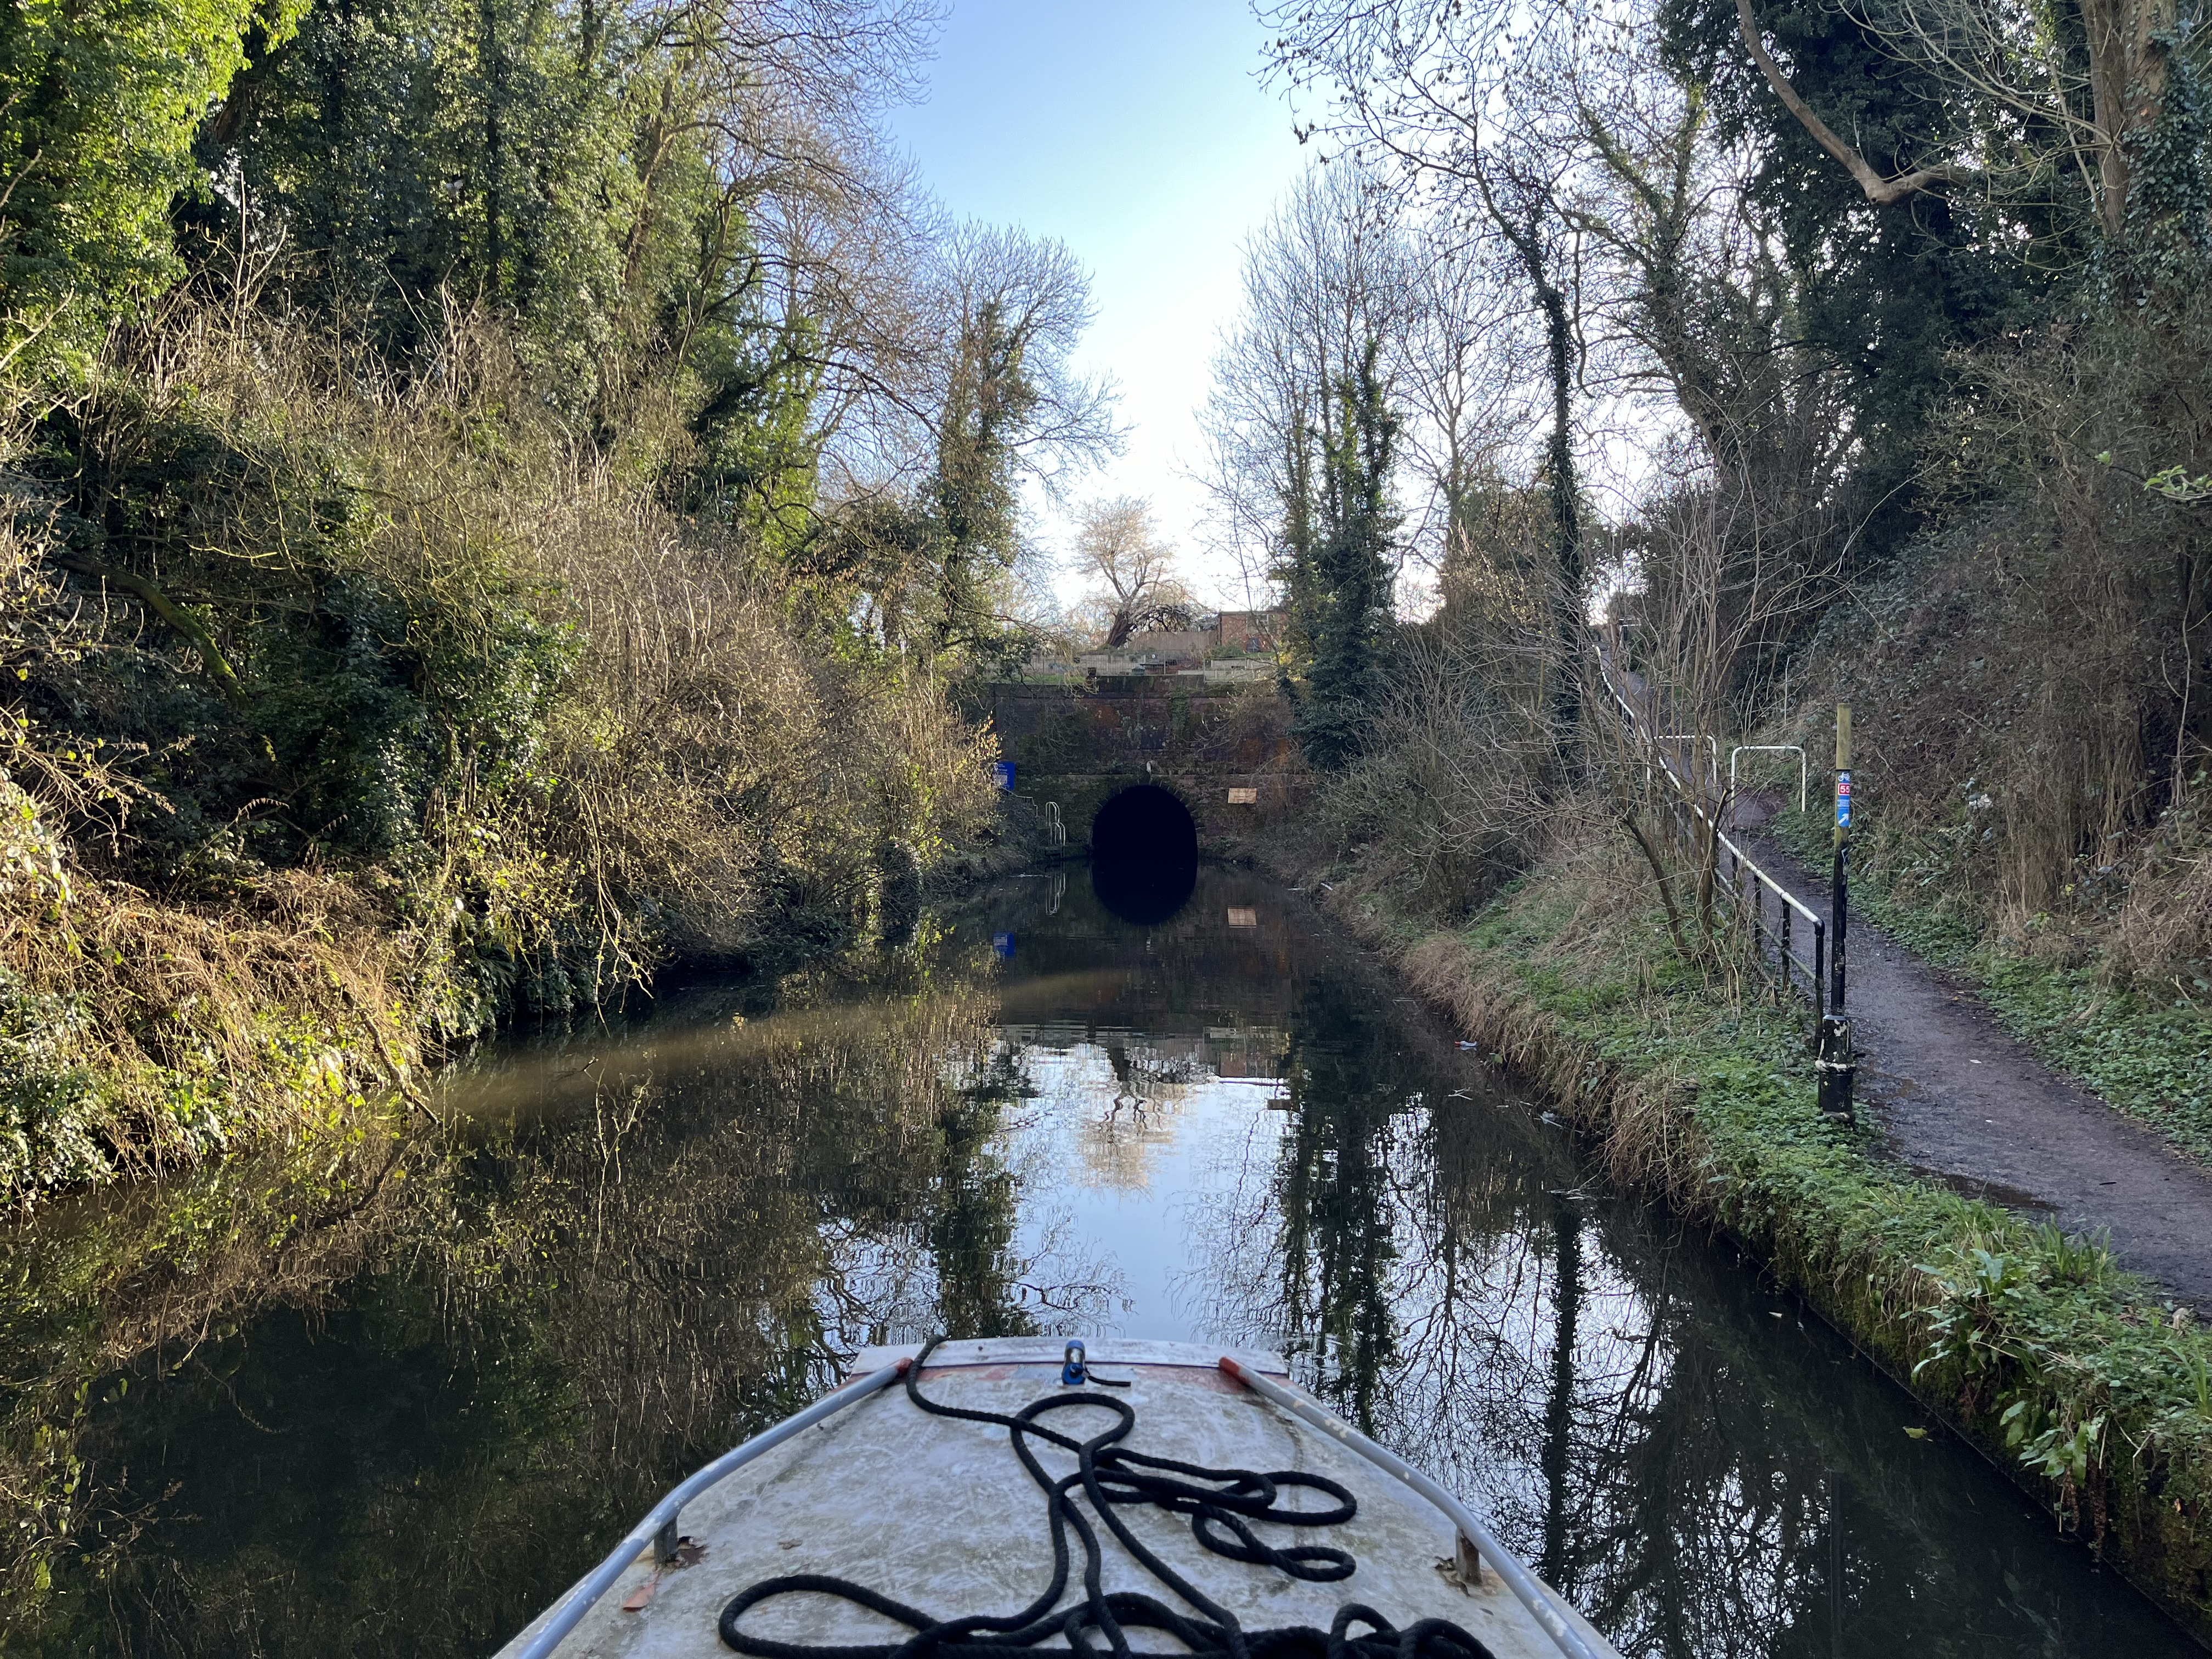 Approaching King's Norton tunnel